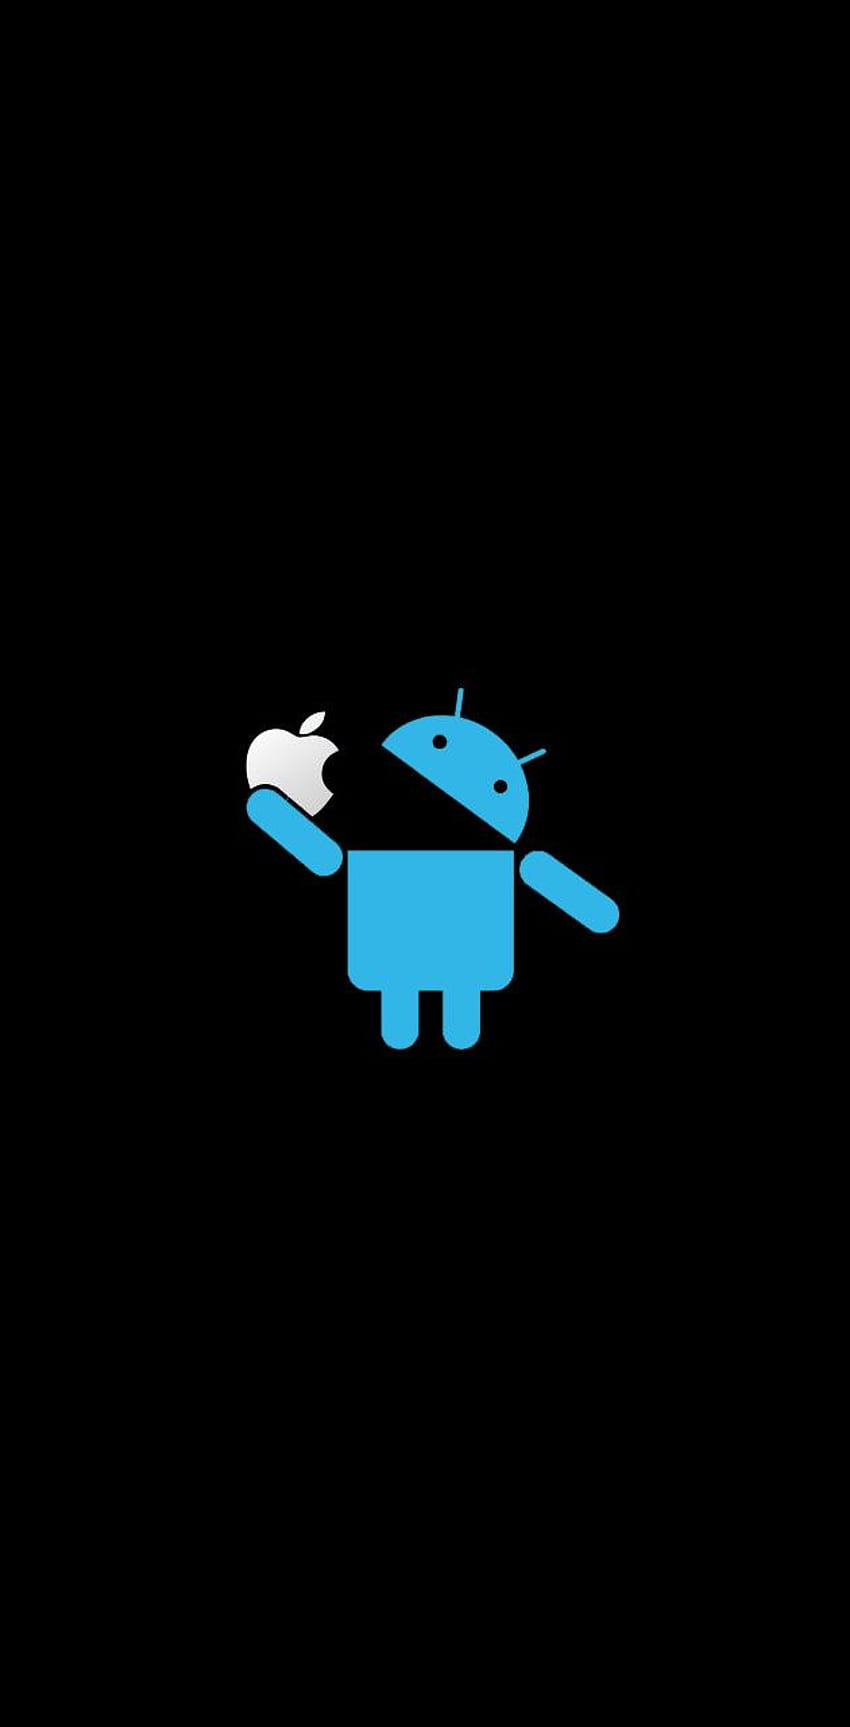 Android Eat Apple, Apple Eating Android HD phone wallpaper